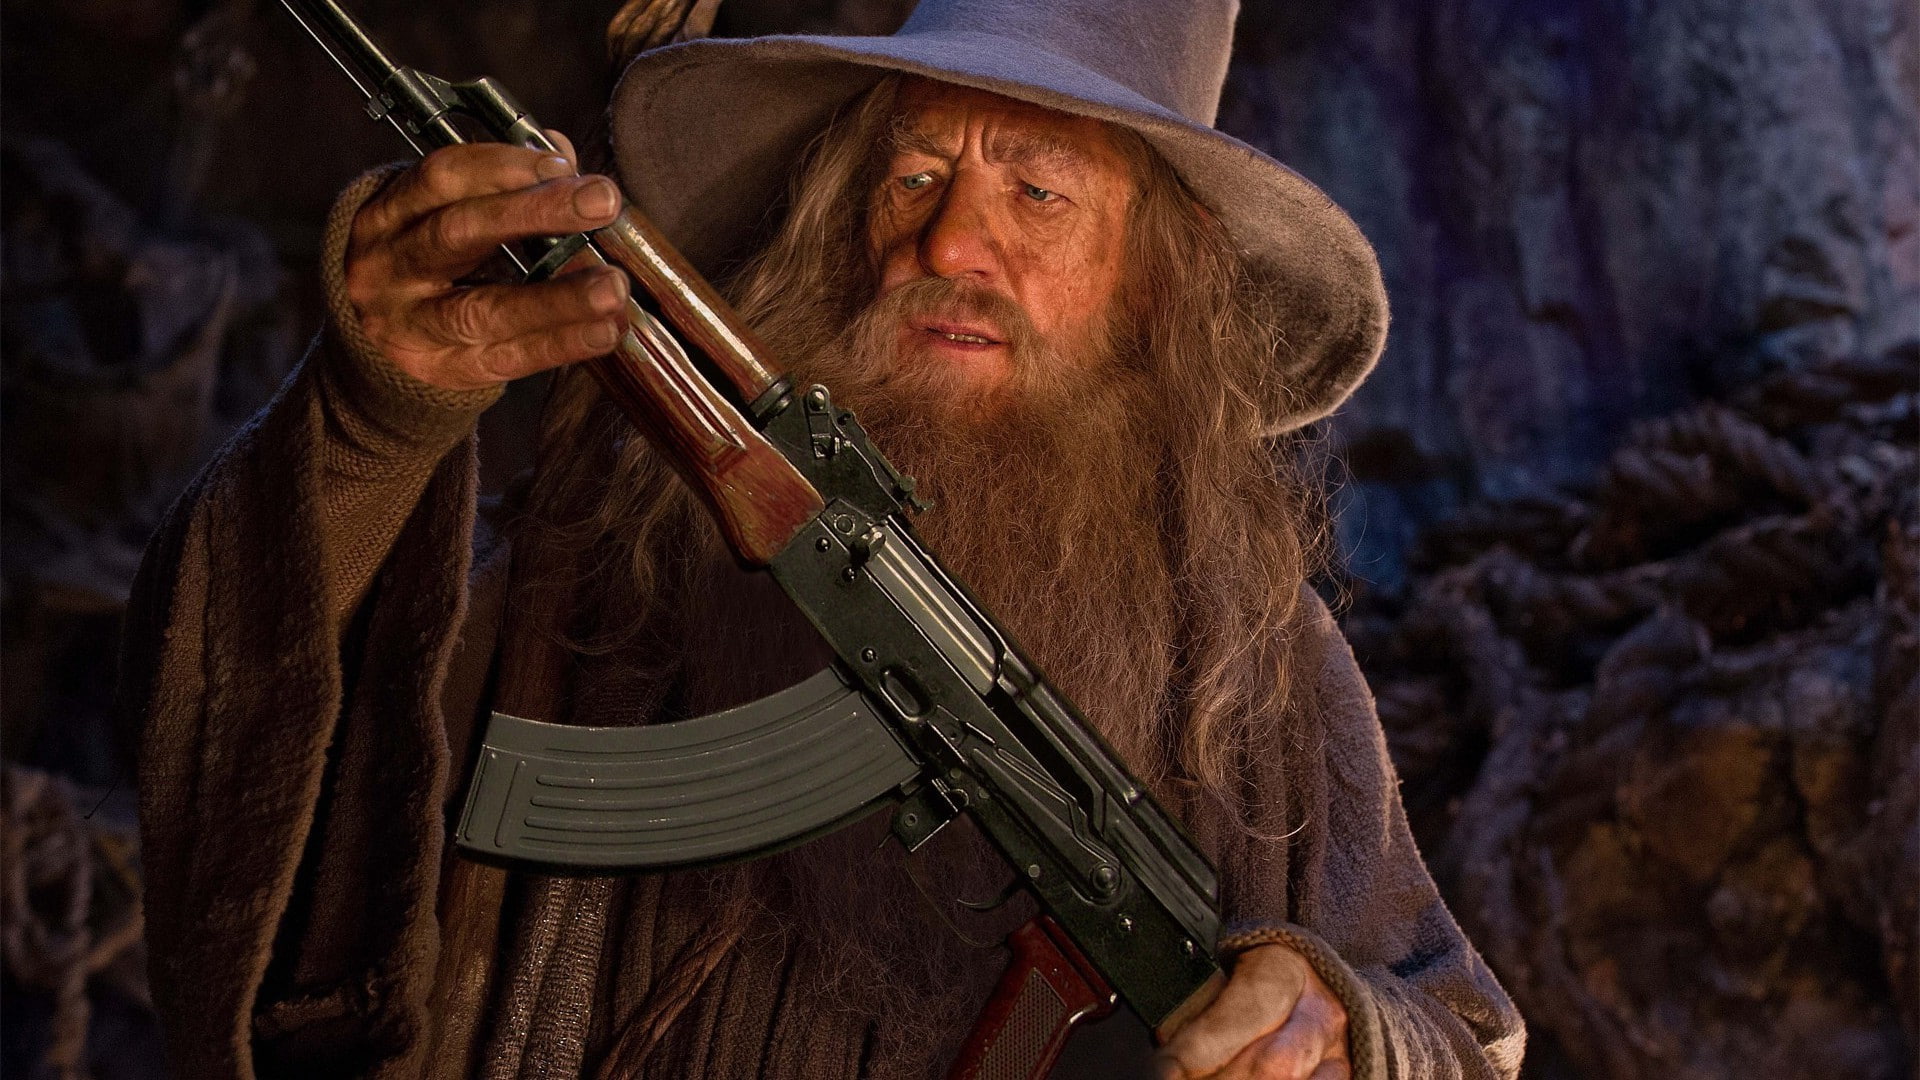 gandalf ak 47 the lord of the rings photo manipulation humor